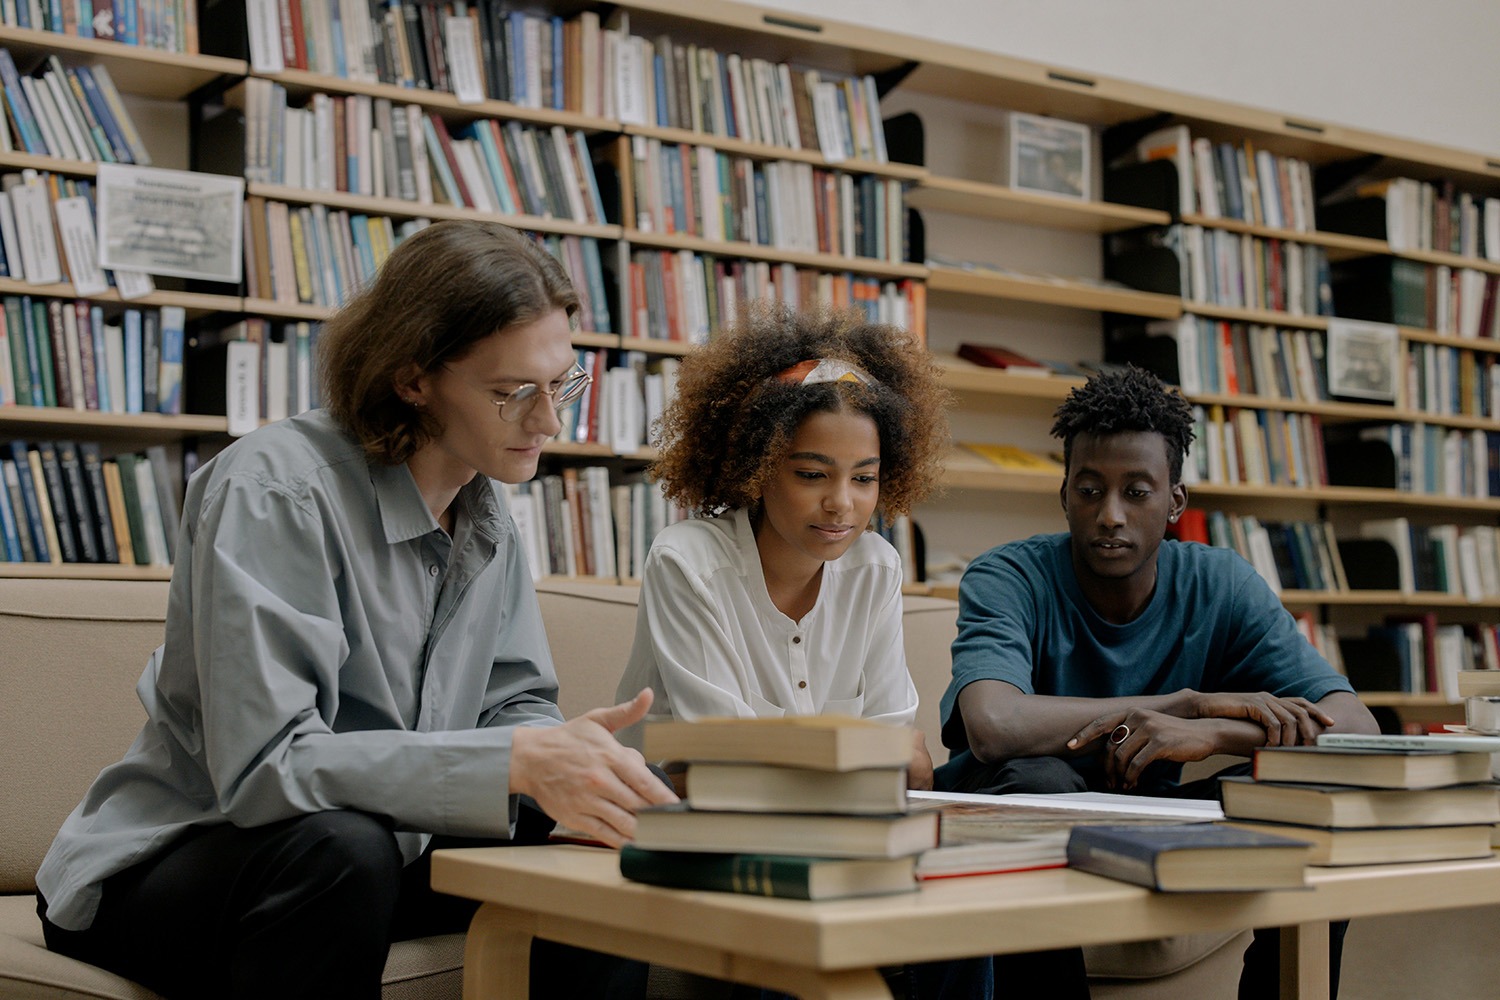 Stock image of students in a library 